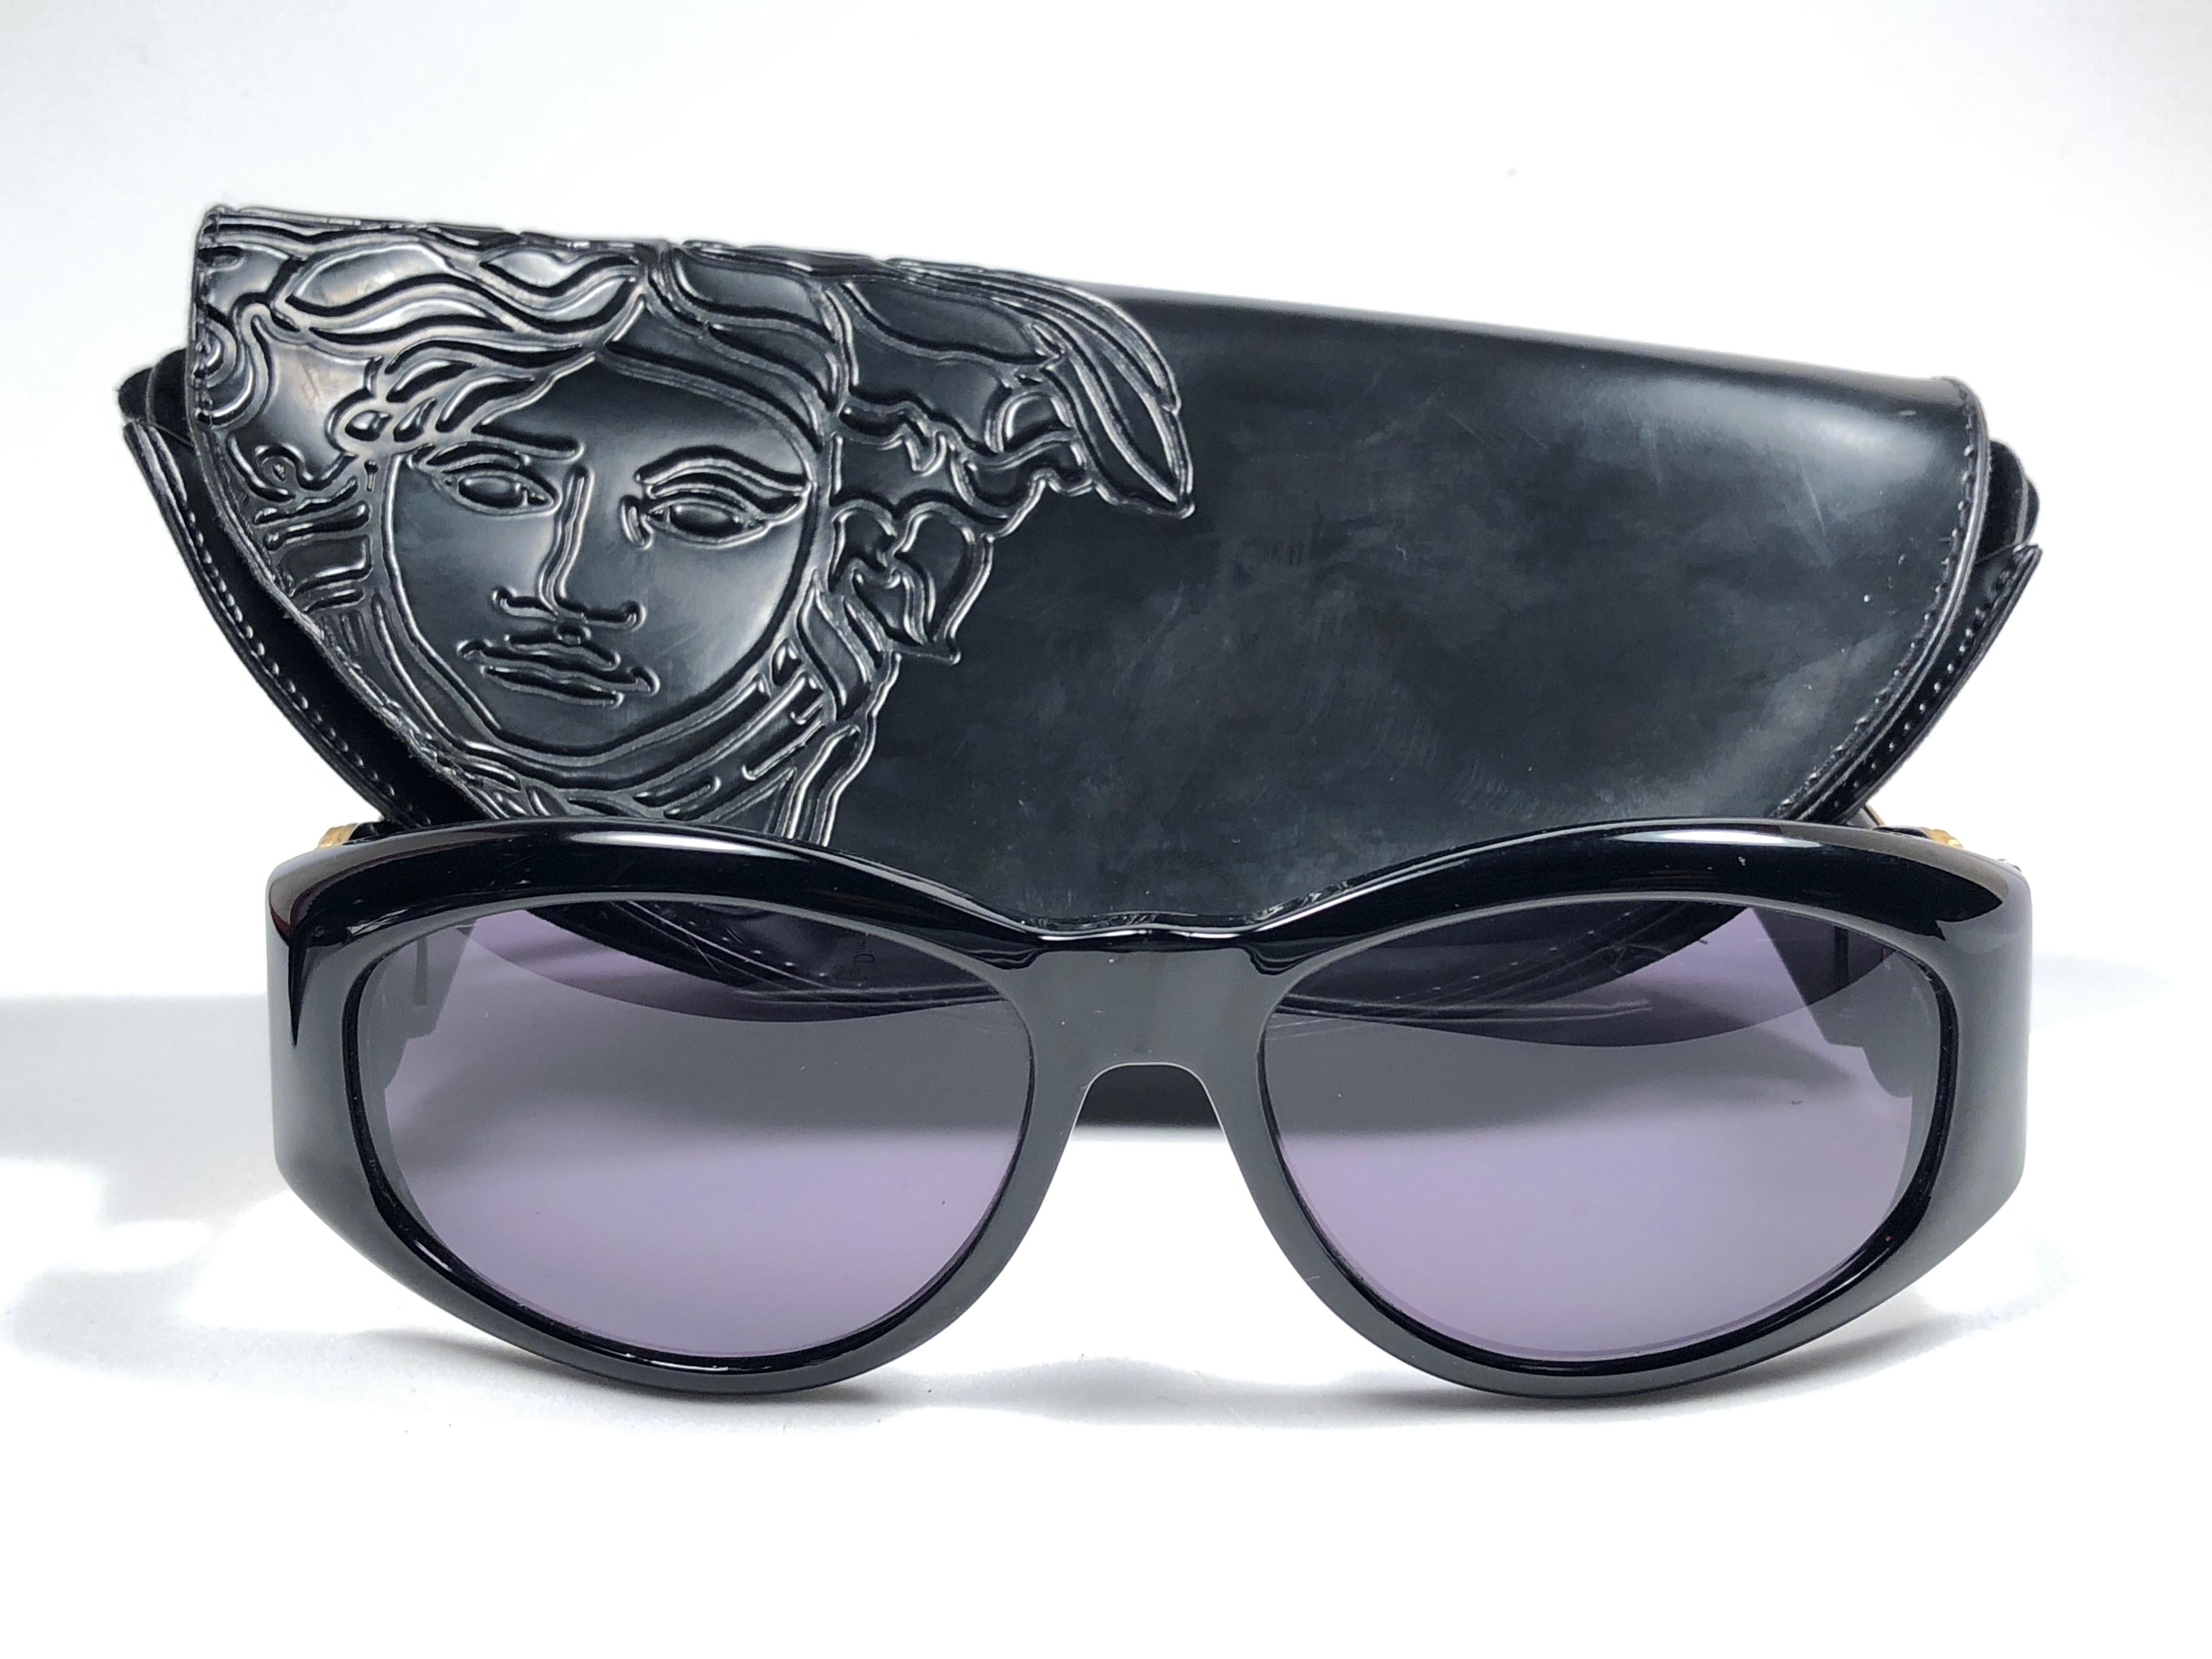 New Vintage Gianni Versace medium BLACK with gold and rhinestones accents frame with medium grey lenses.

New never worn or displayed. Comes with its original Gianni Versace sleeve and cleaning cloth.
This pair could show minor sign of wear due to